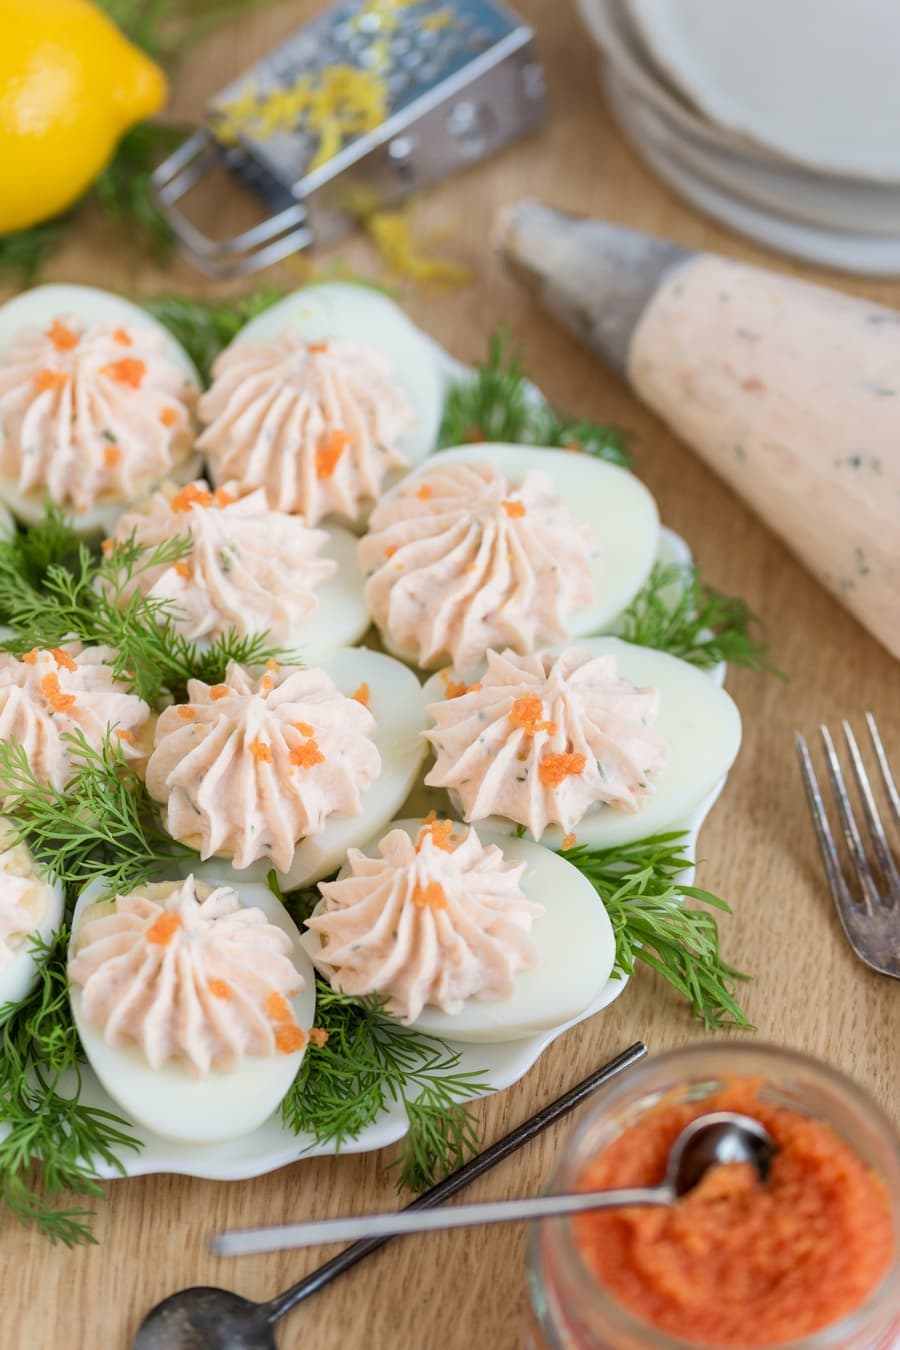 Scandinavian deviled eggs with smoked salmon mousse and fish roe